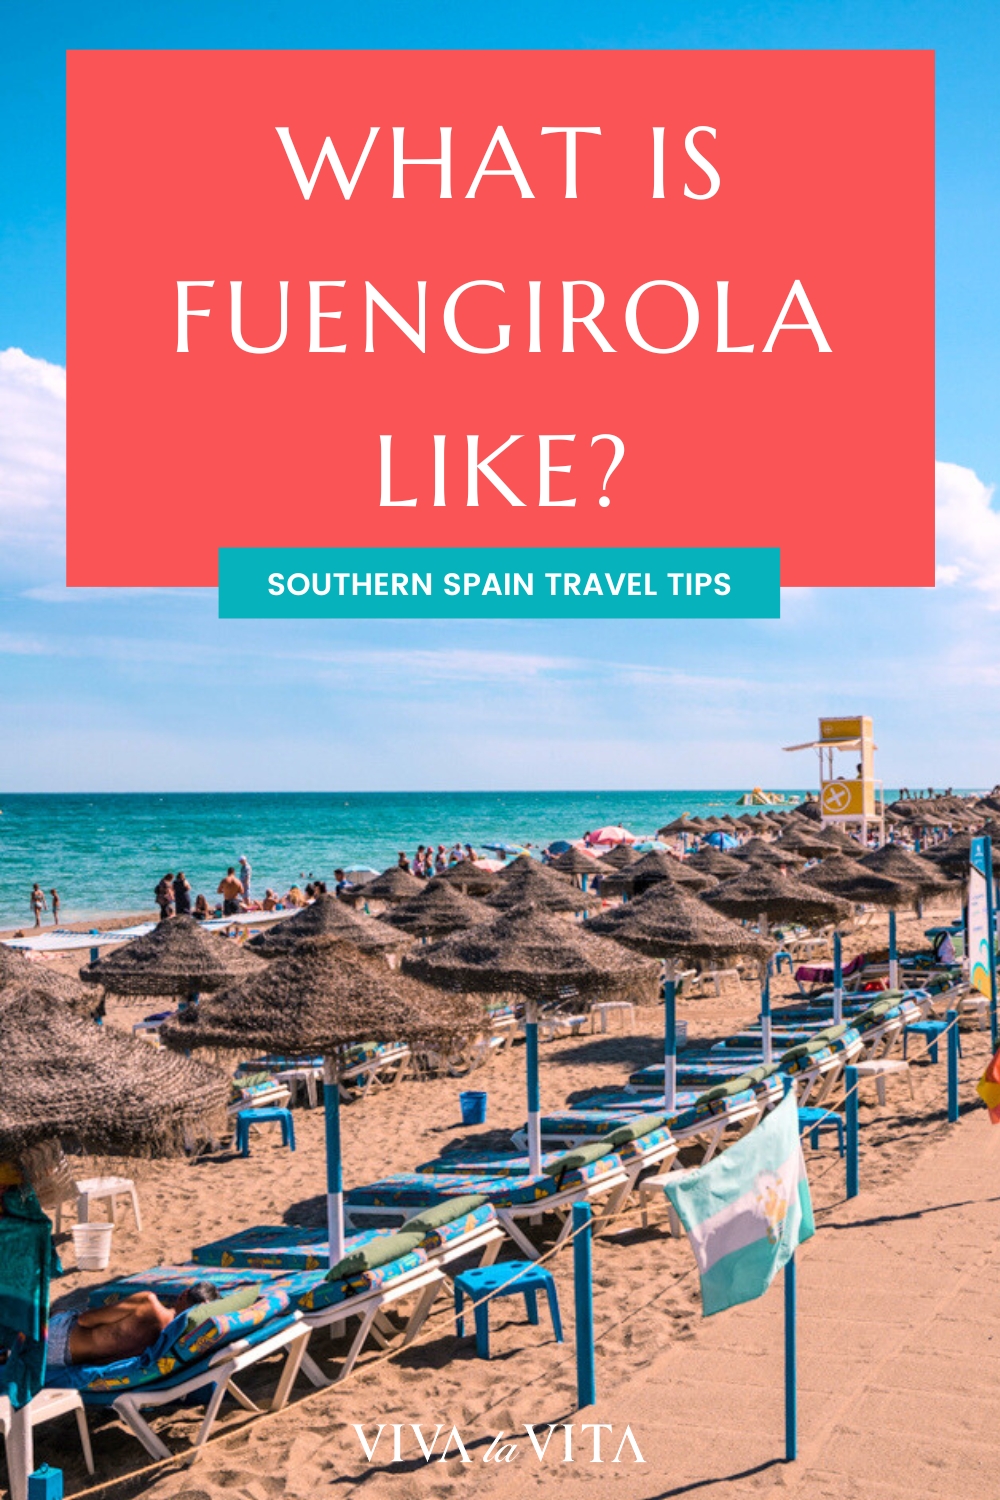 pinterest image showing a beach in Fuengirola, with a headline: what is Fuengirola like? Southern spain travel tips.